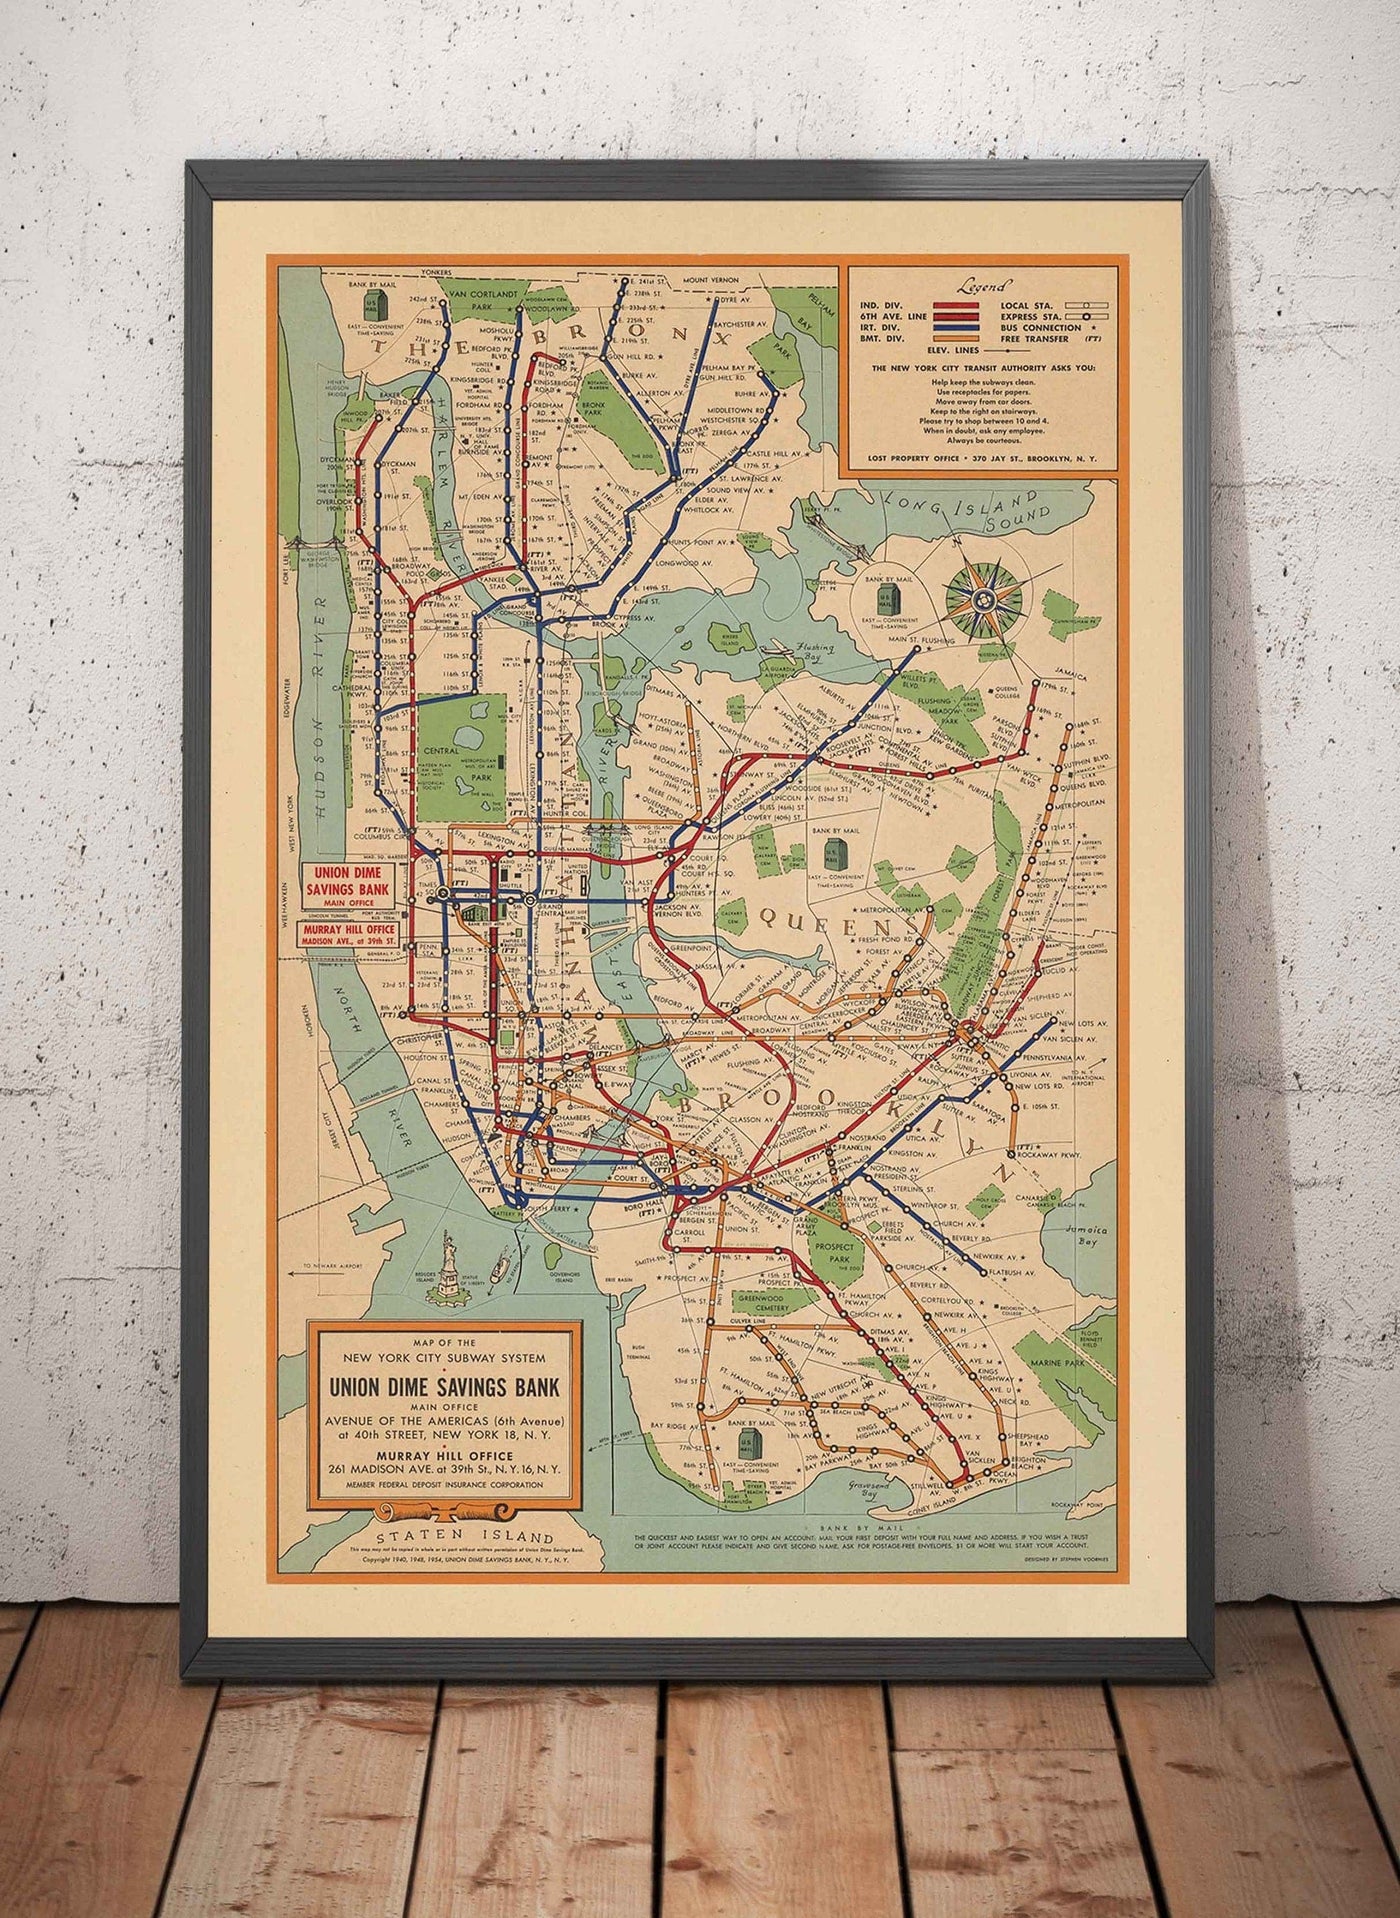 Old Subway Map of New York City, 1954 by Voorhies - Queens, Brooklyn, Manhattan, IND, IRT, BMT Rail Lines